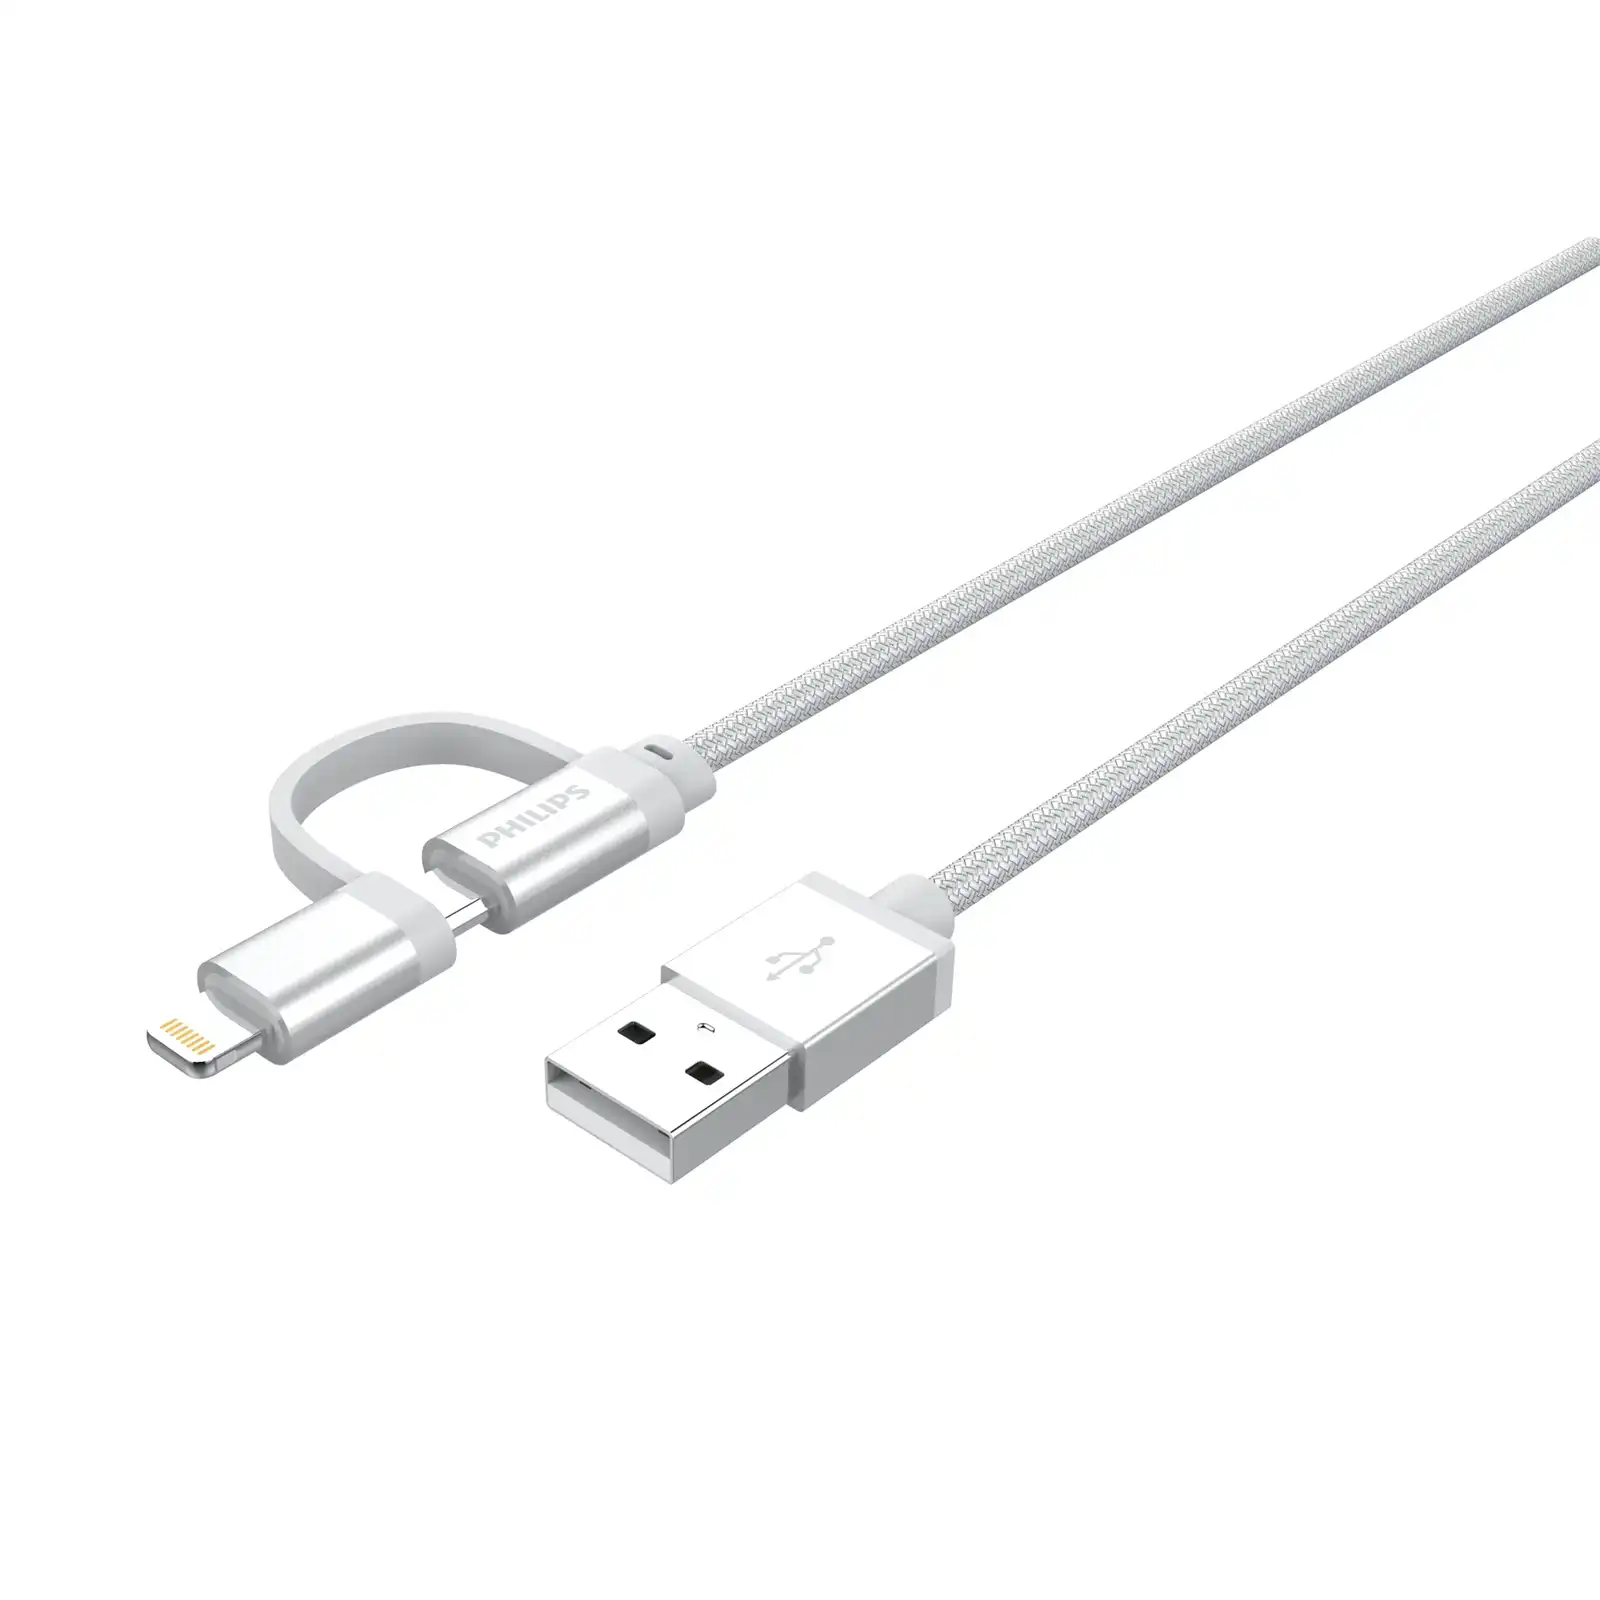 Philips 2-in-1 USB A to Micro and Lightning, Braided cable, 1.2m Silver